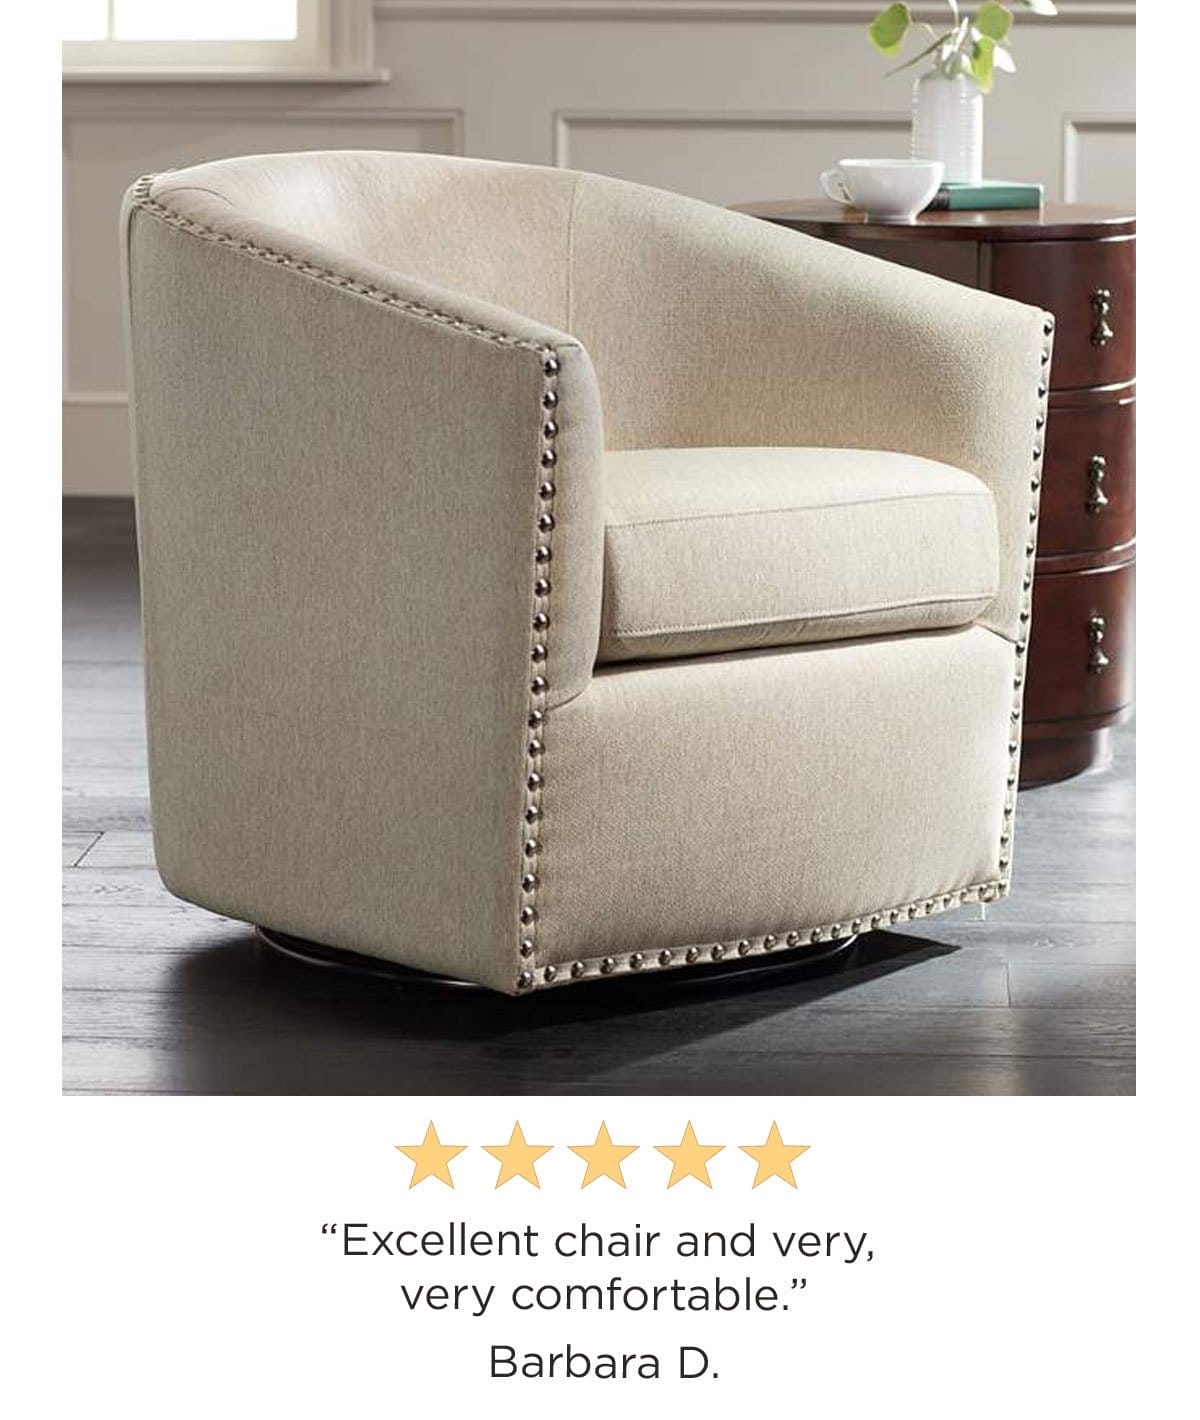 5 stars - "Excellent chair and very, very comfortable." Barbara D.